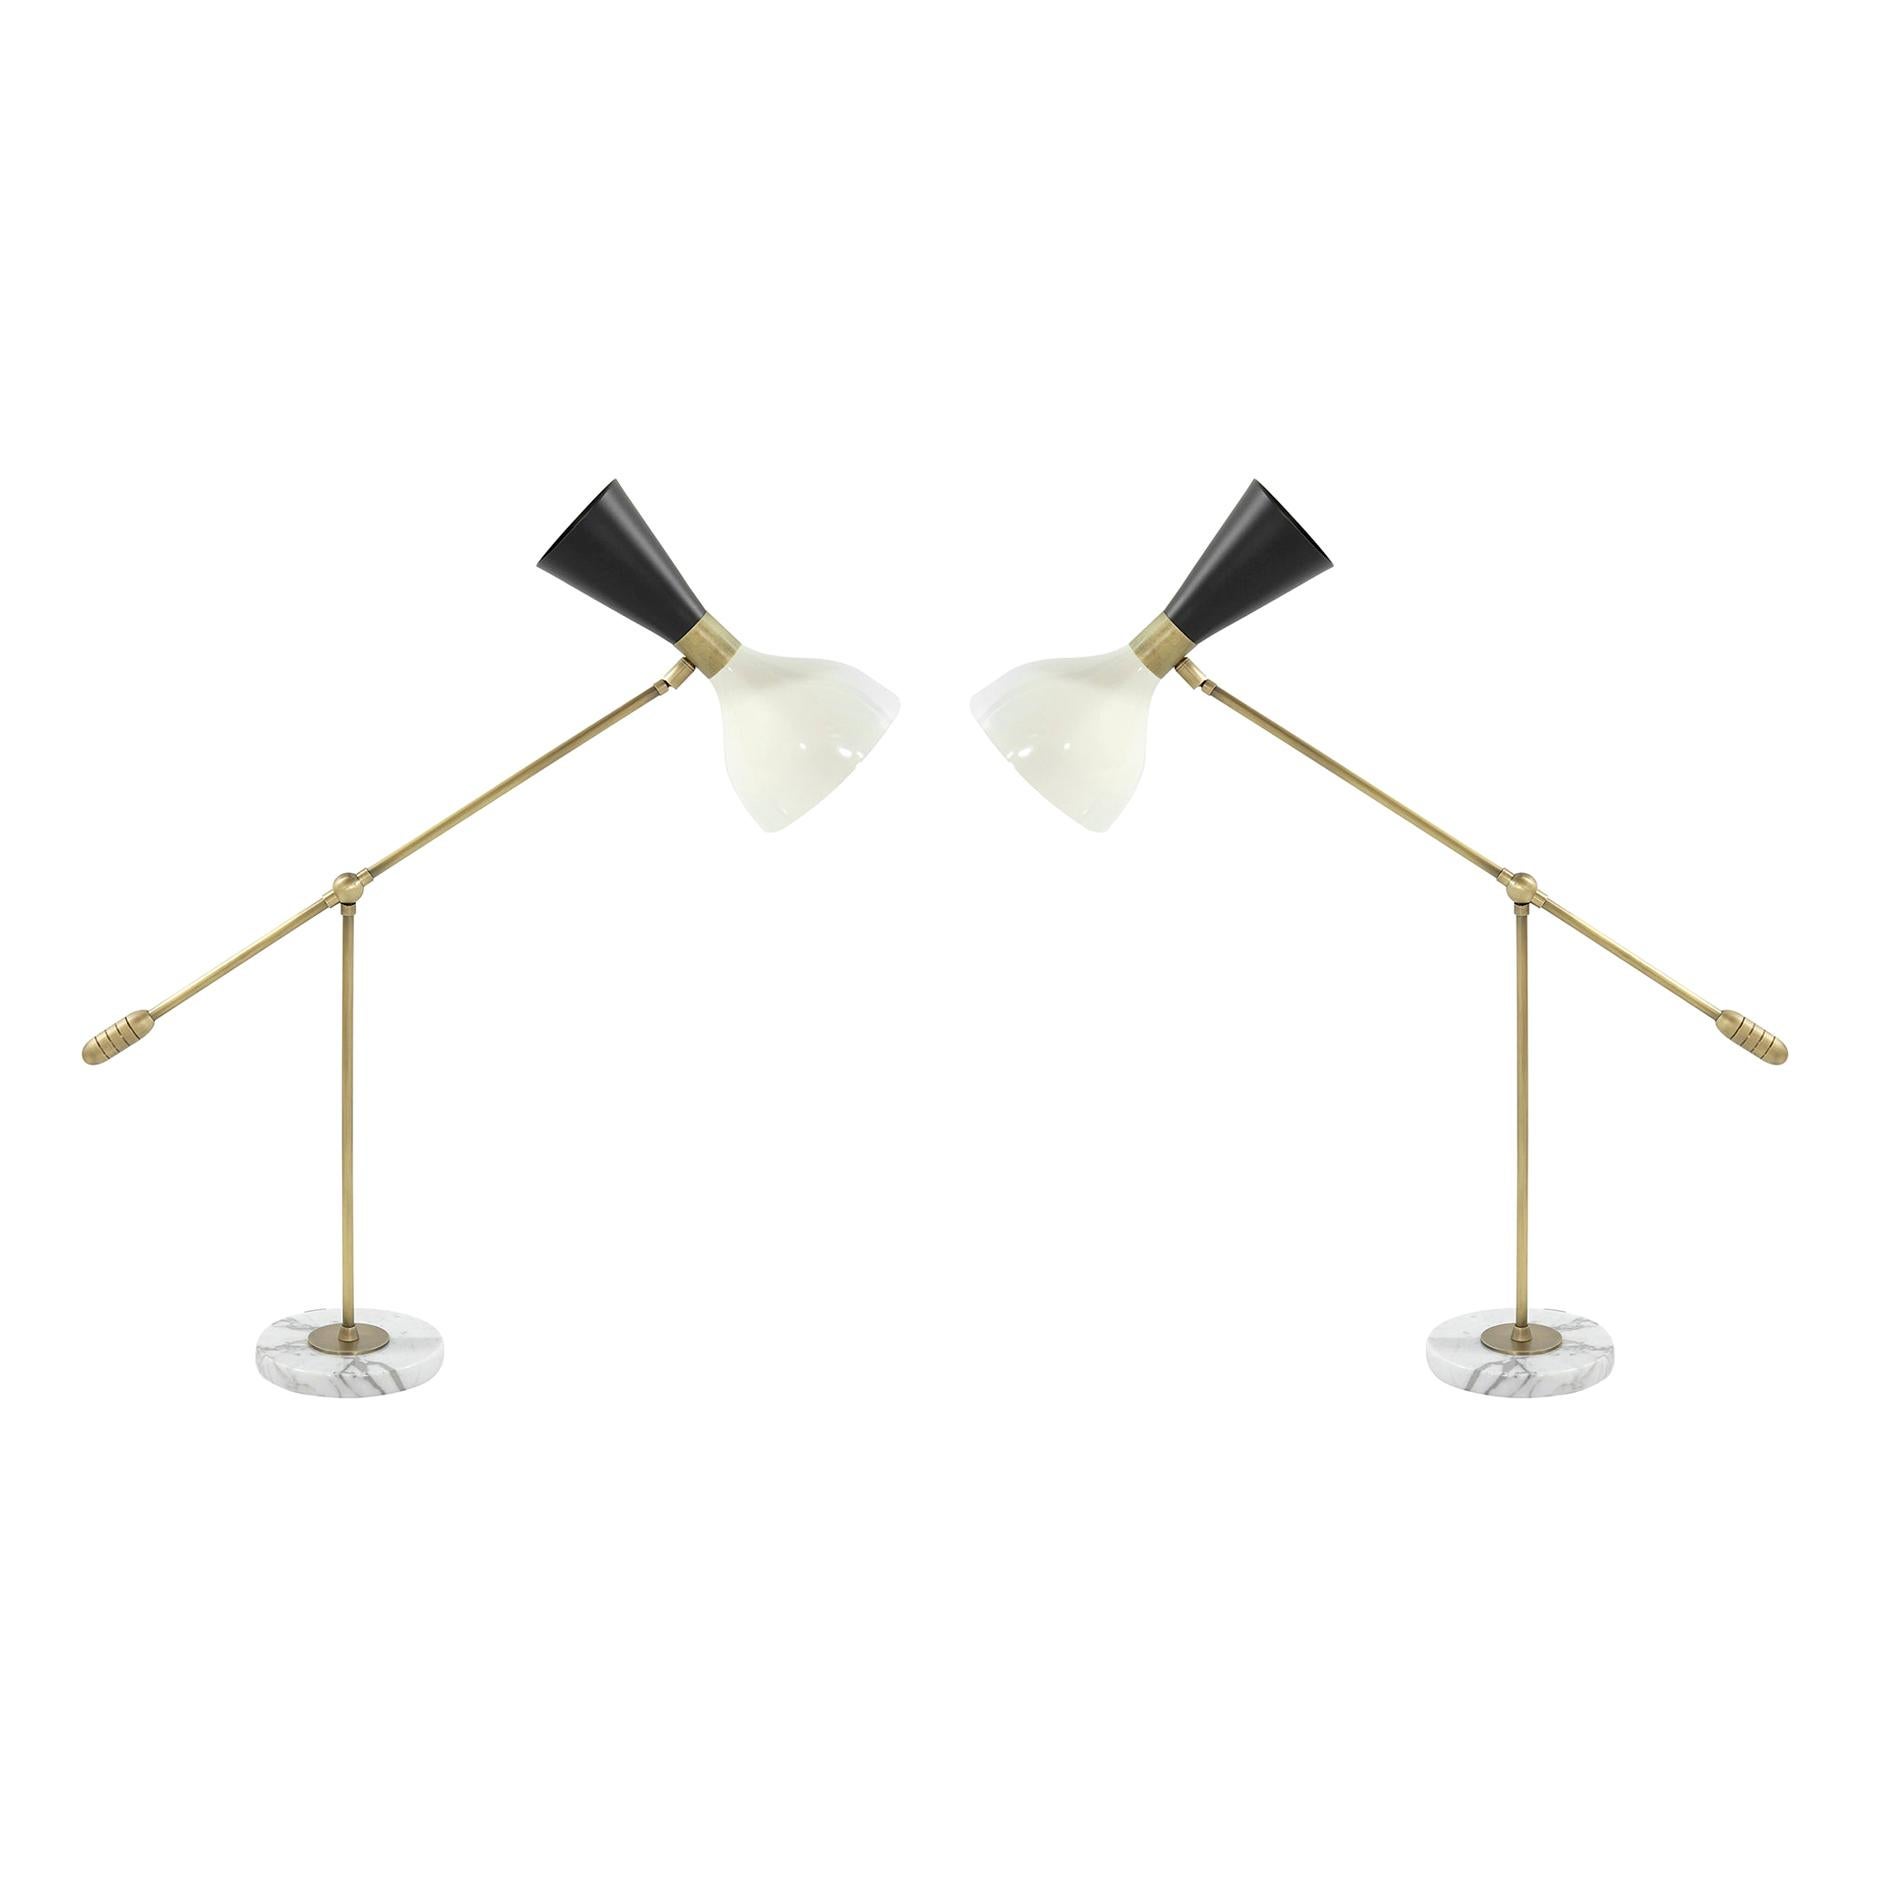 "Ludo" Table Lamps For Sale